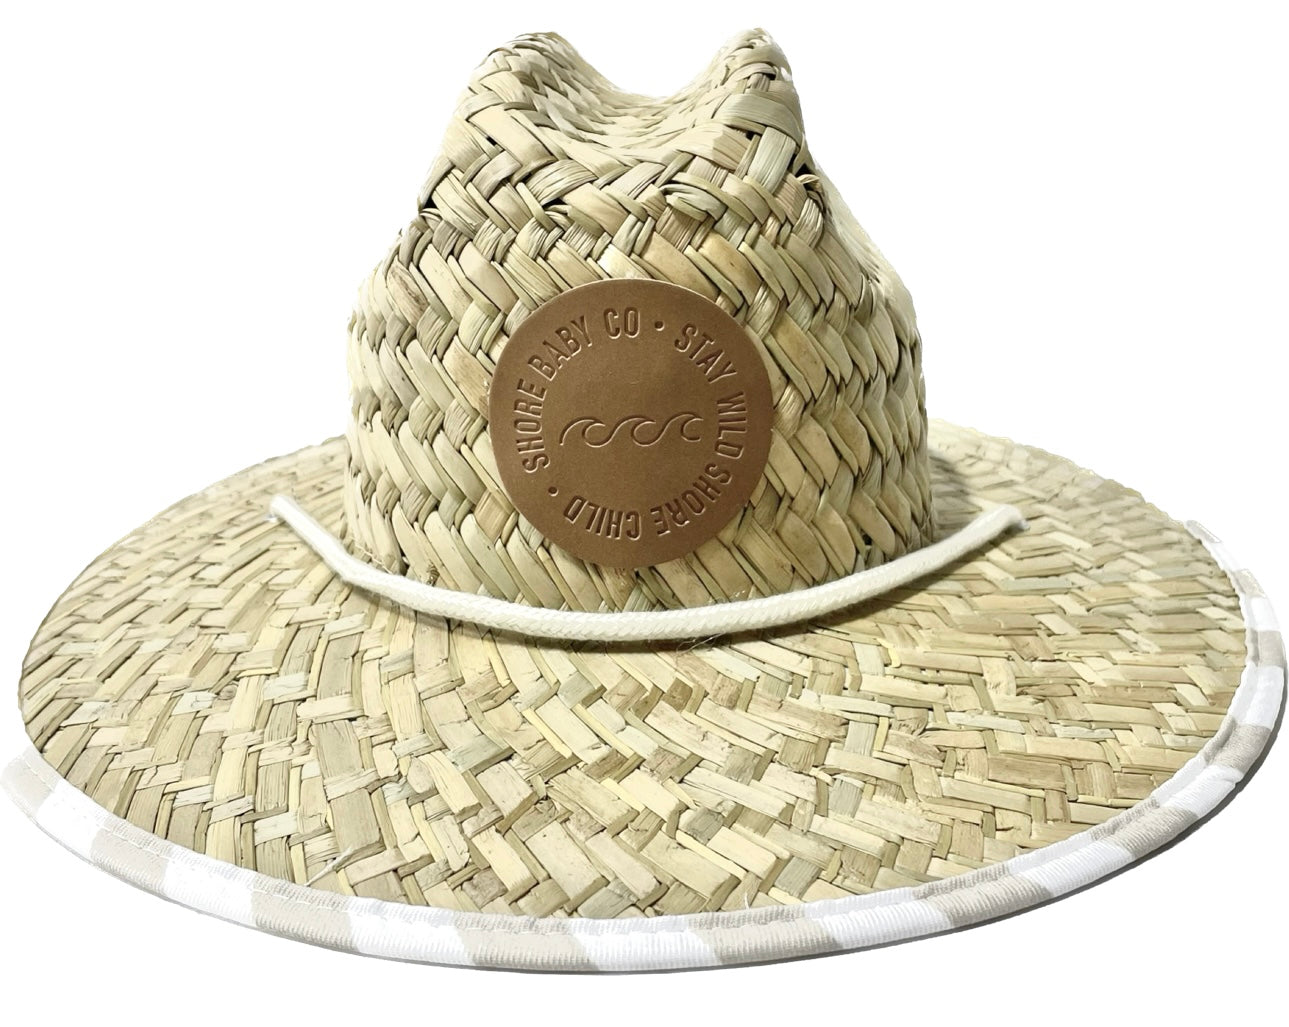 Lighthouse Ave Shore Hat